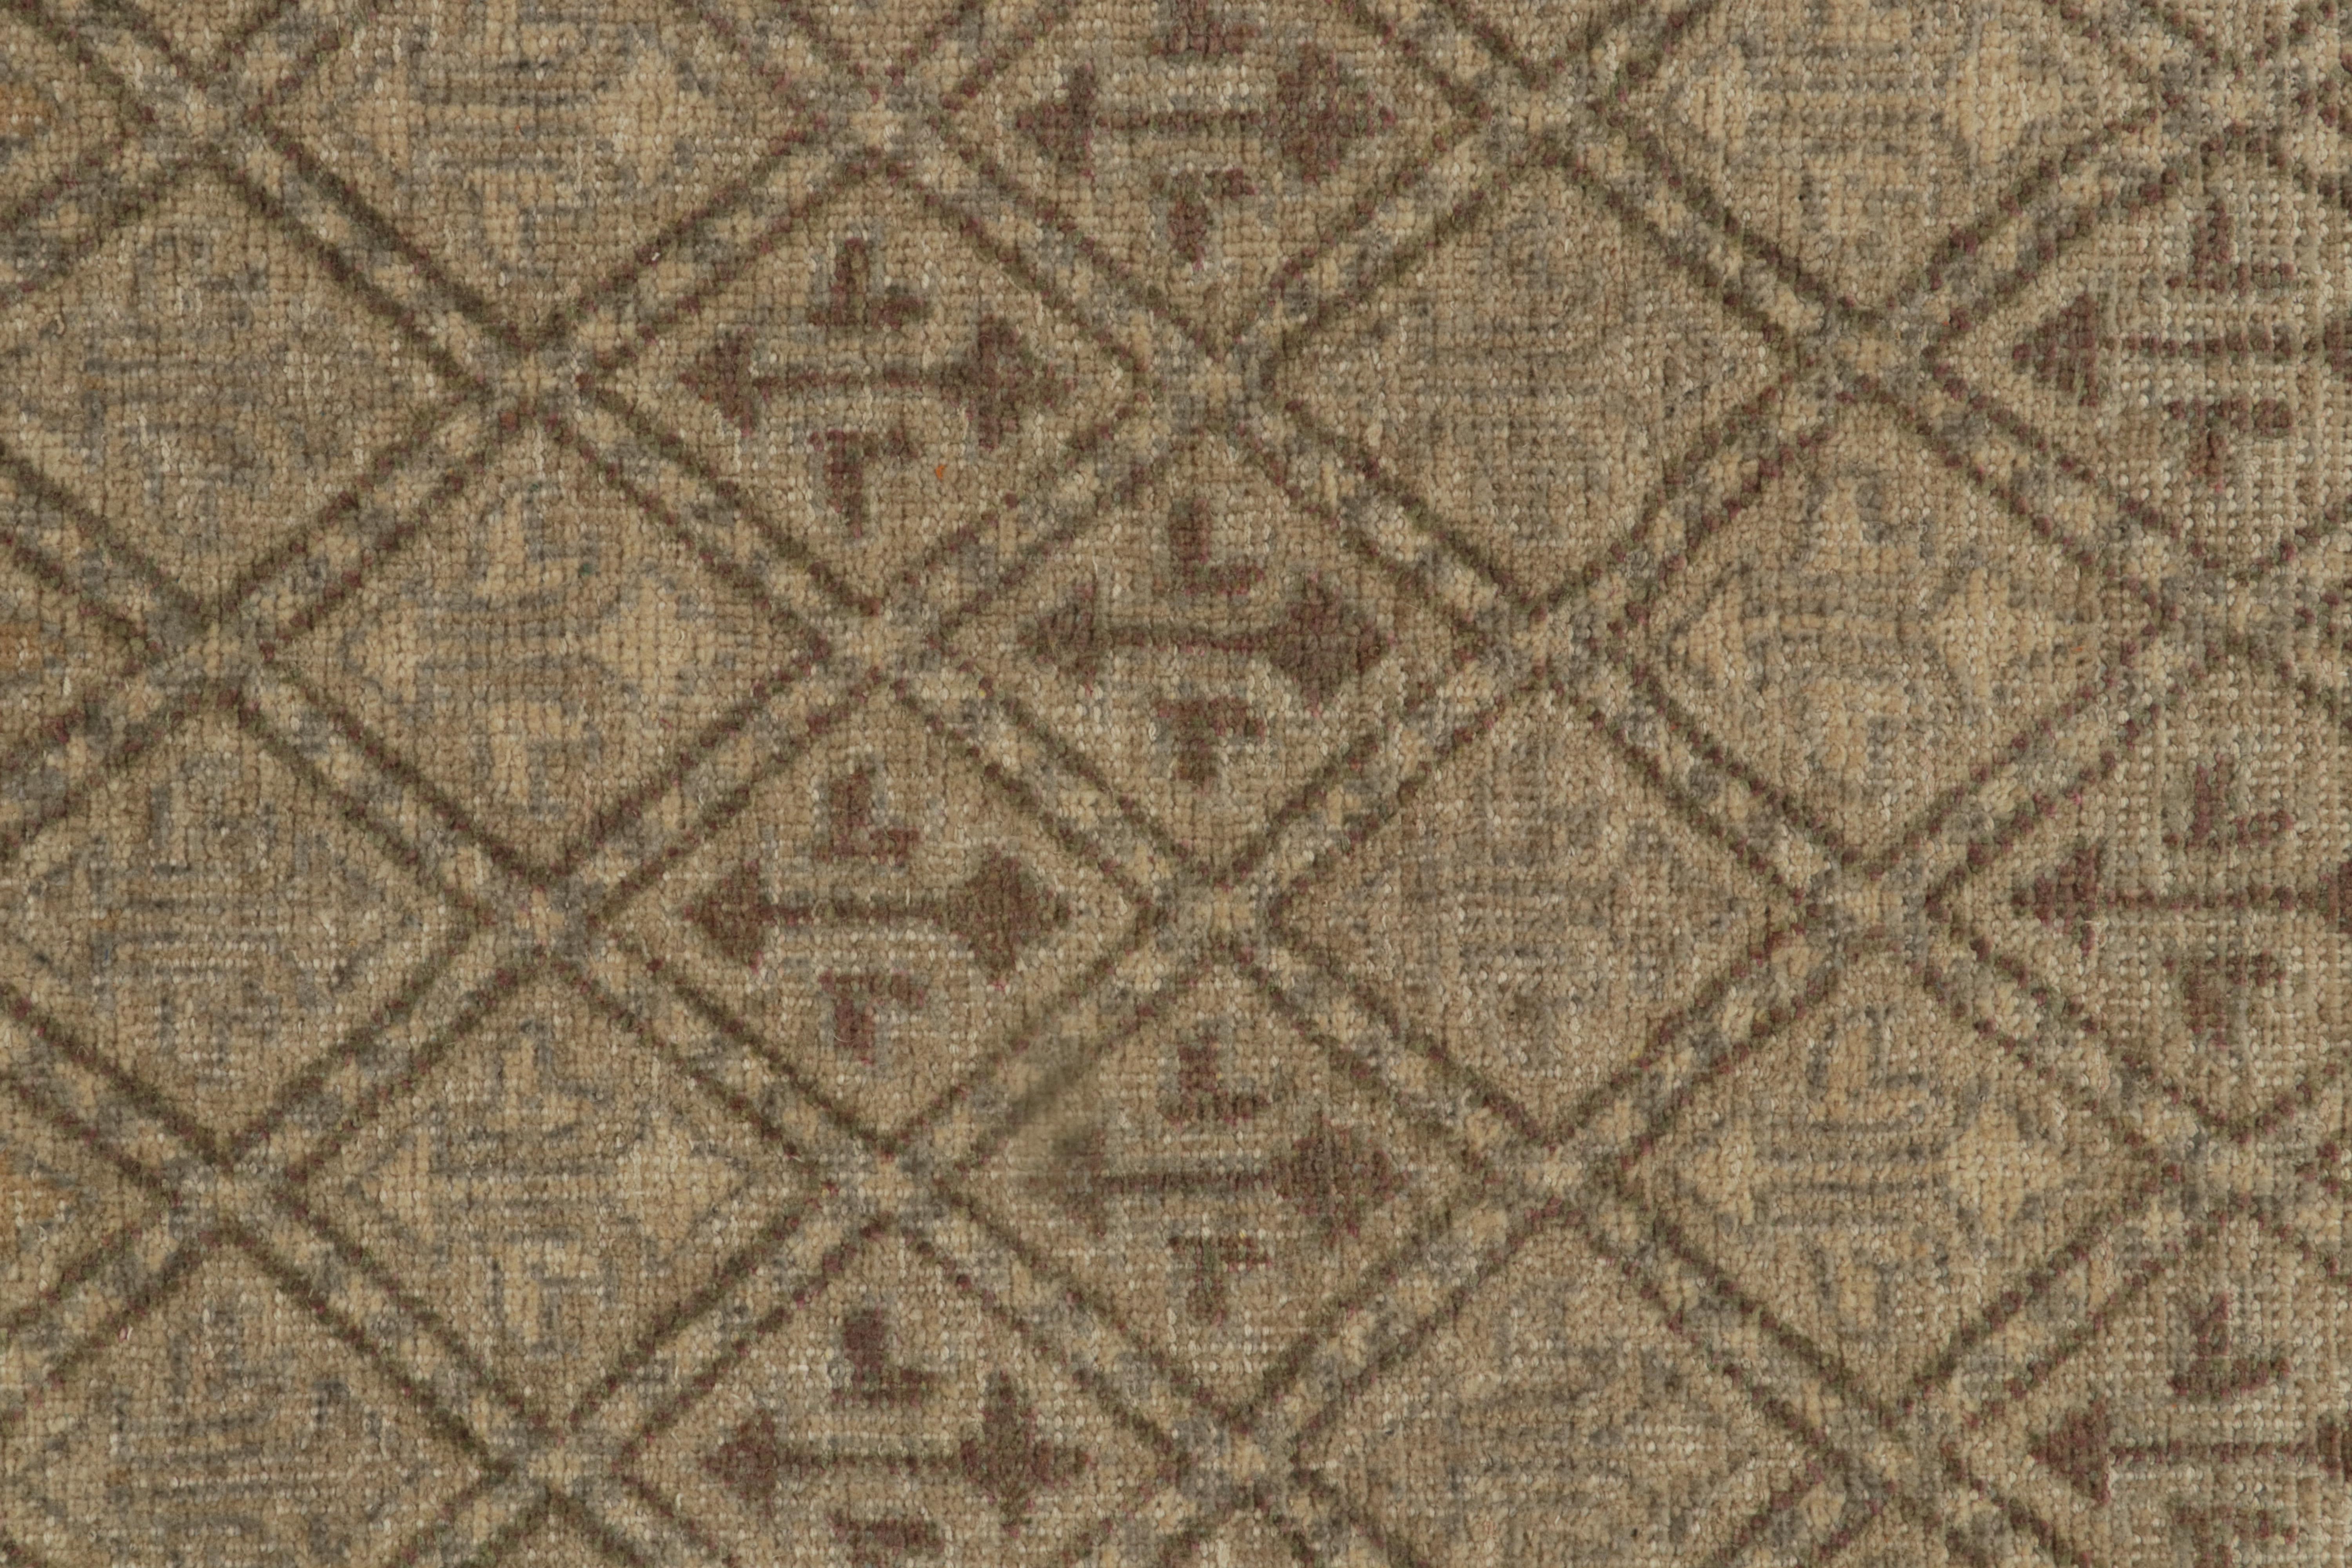 Contemporary Rug & Kilim’s Distressed Style Runner in Beige-Brown & Gray Tribal Patterns For Sale